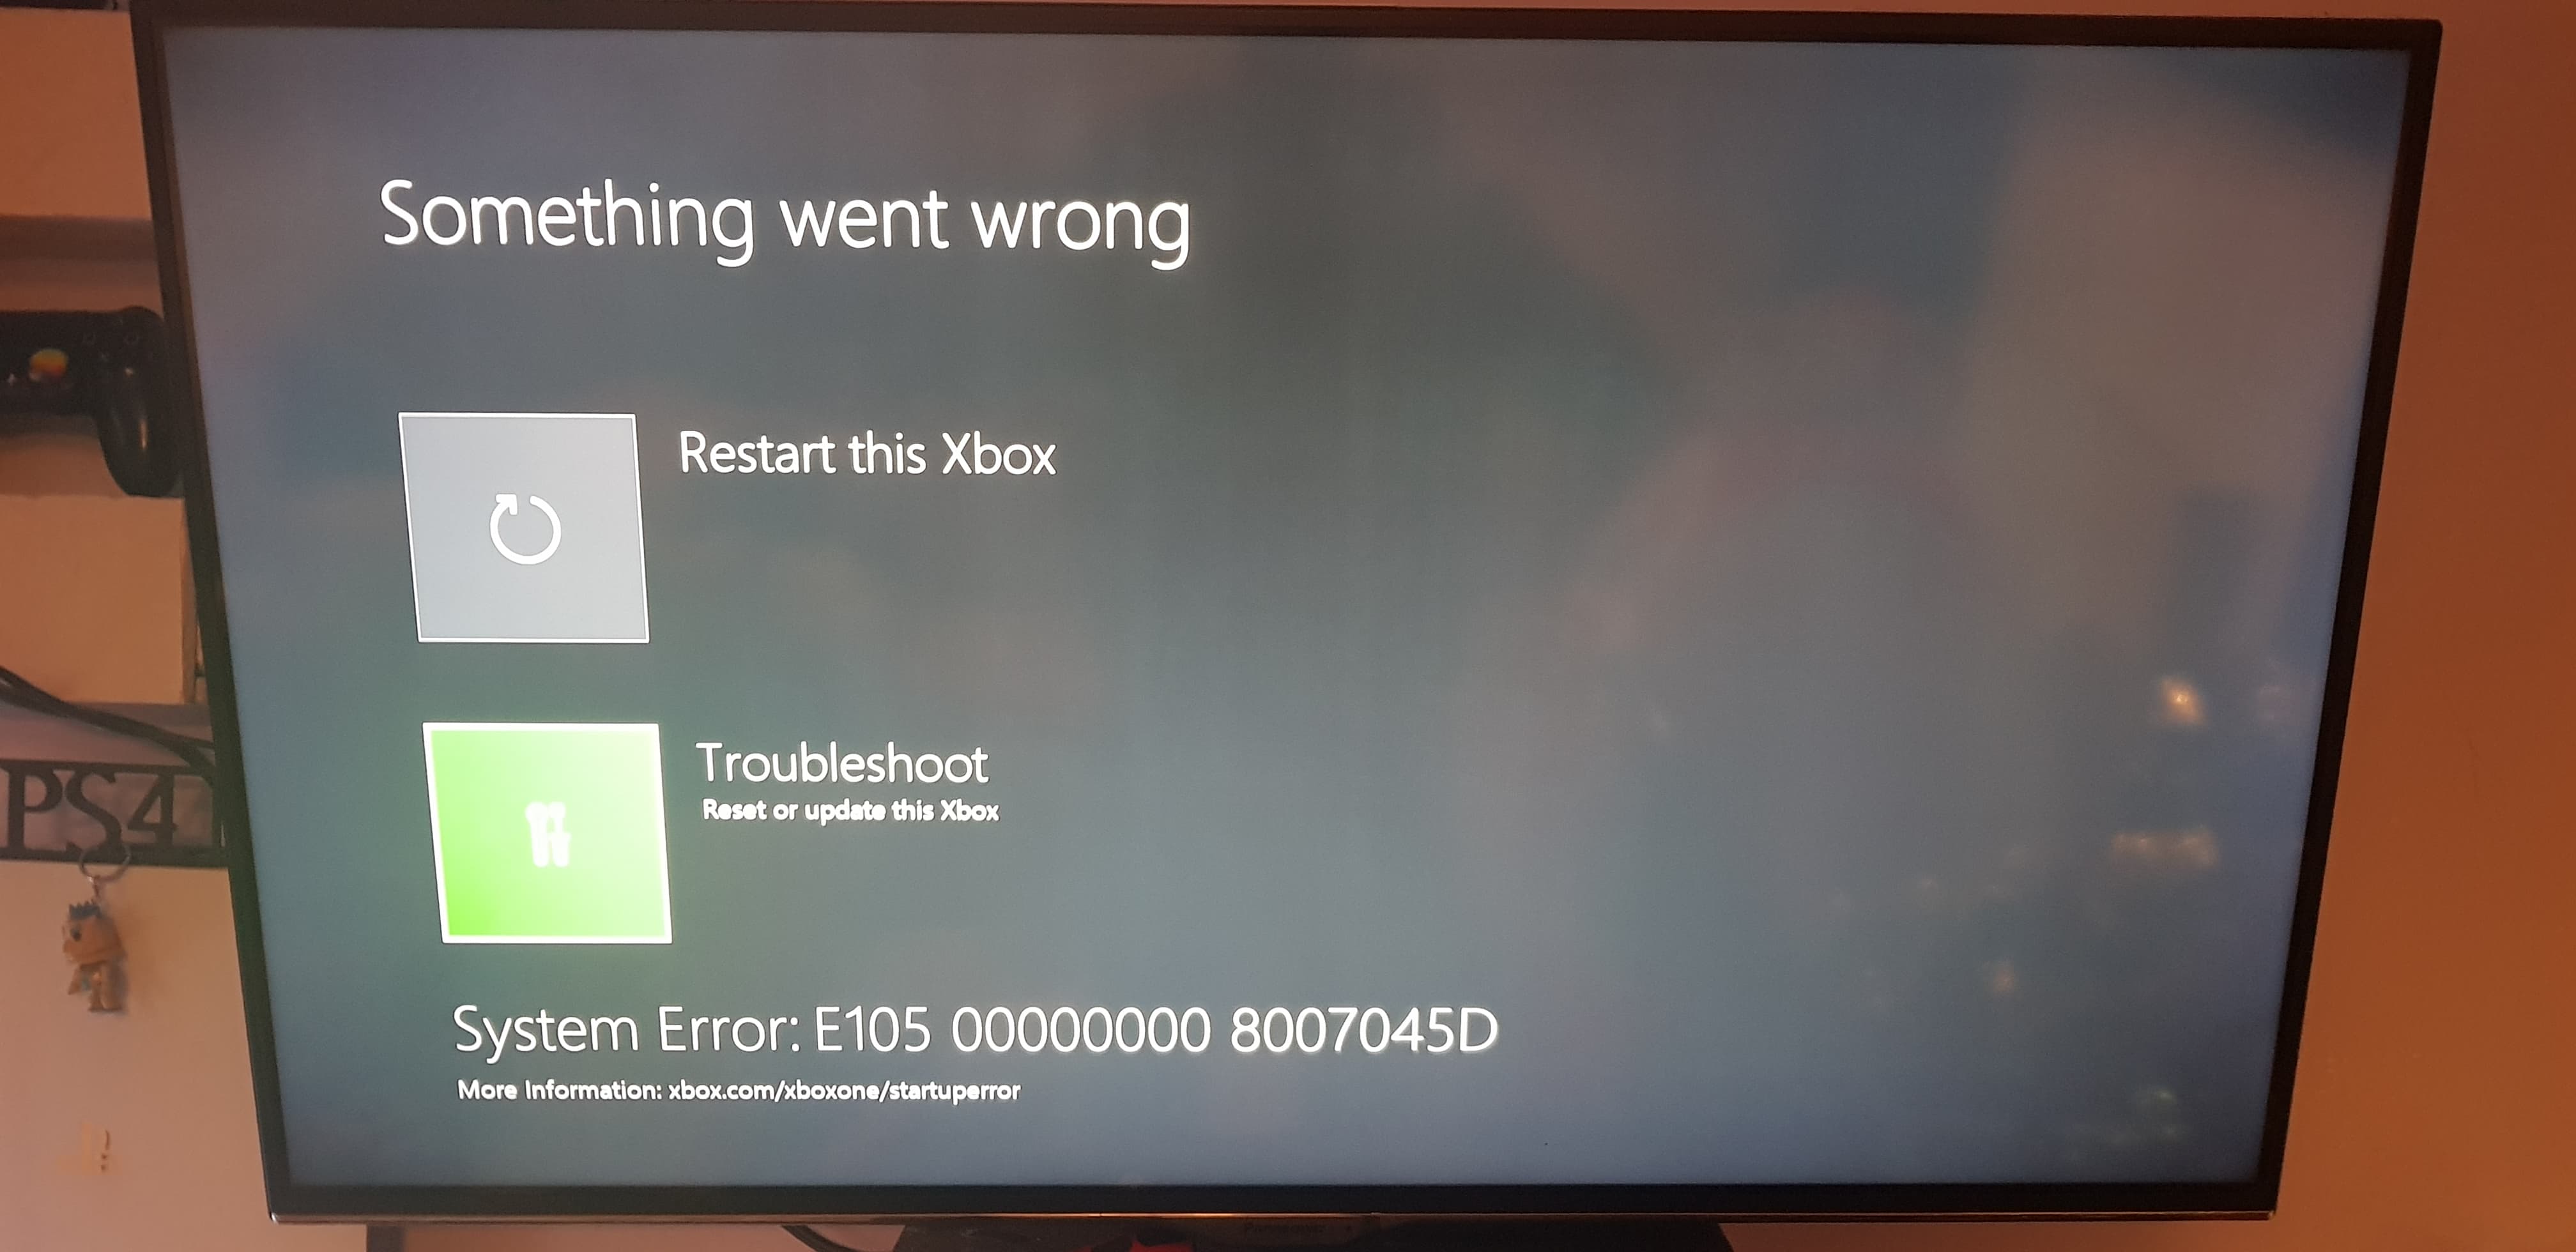 xbox one x problems | GBAtemp.net - The Independent Video Game Community